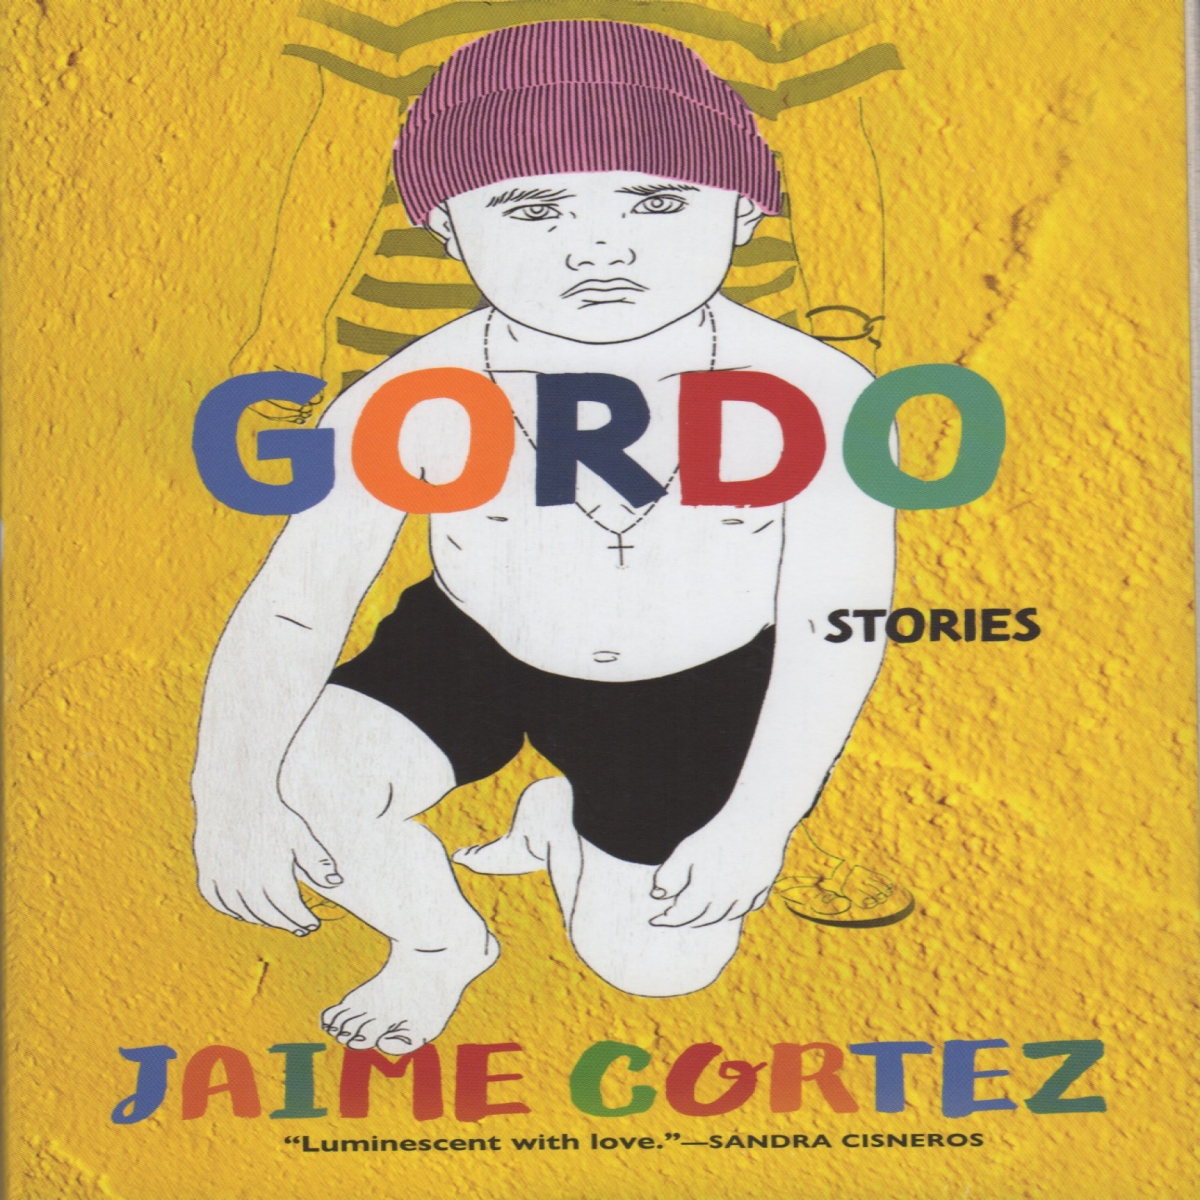 The yellow graphic cover for Jaime Cortez' book 